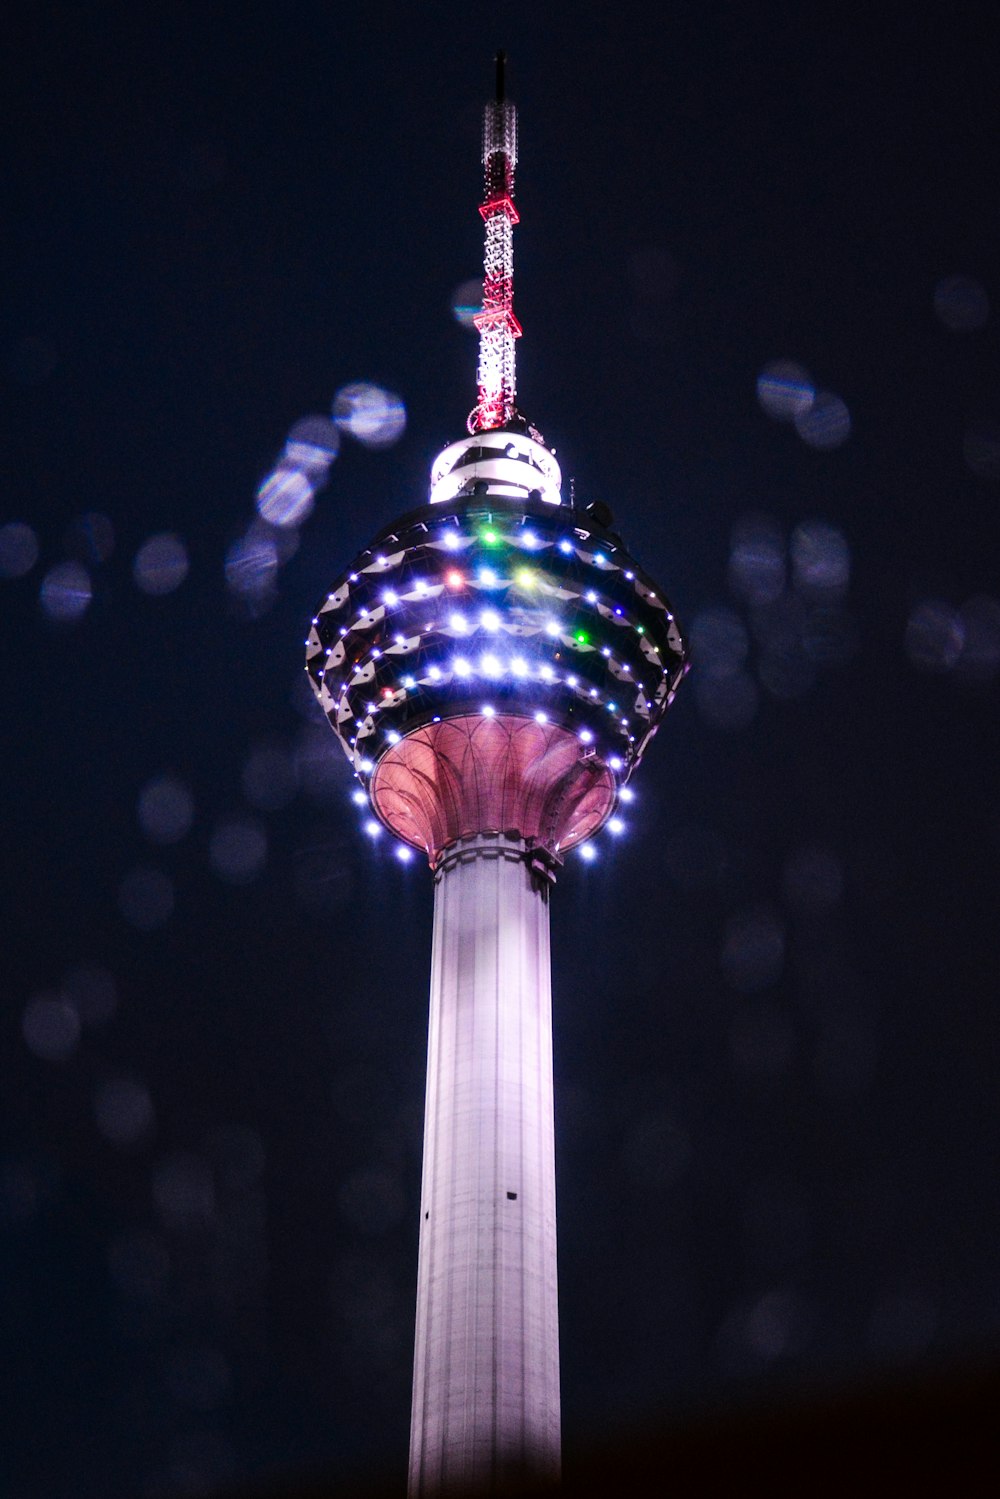 needle tower at night time